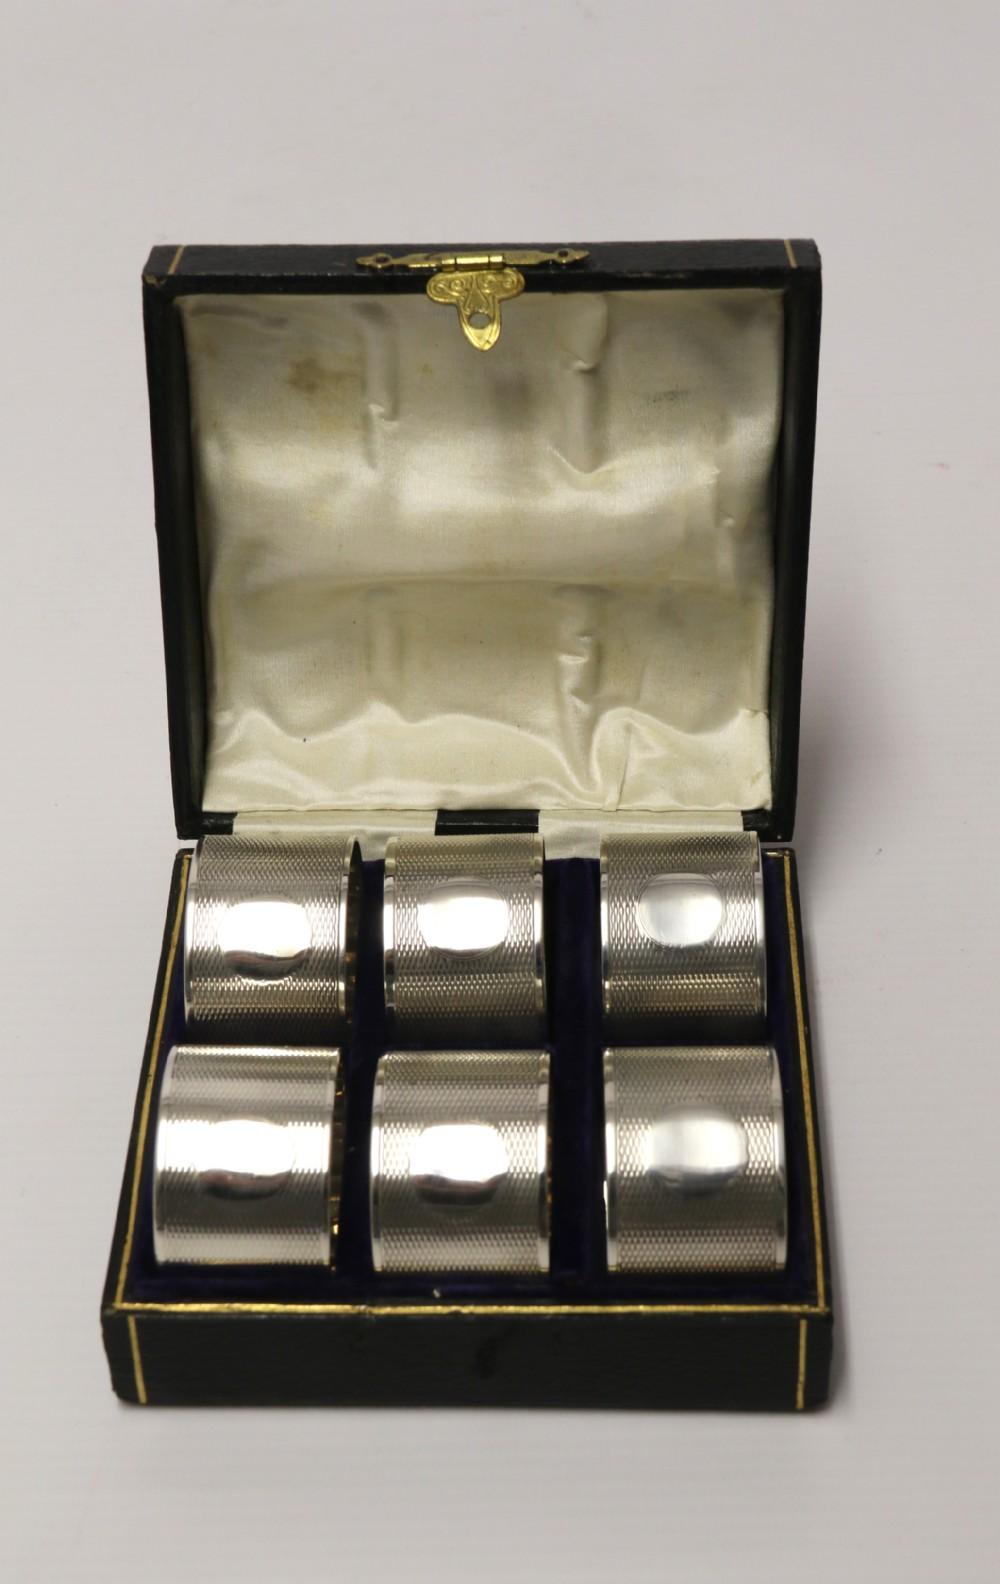 A set of six boxed silver Napkin rings. A good quality set of six engine turned heavy gauge silver napkin rings with circular pateraes for engraving initials. This fine set was made in Birmingham in 1919-1920 and is complete with original fitted